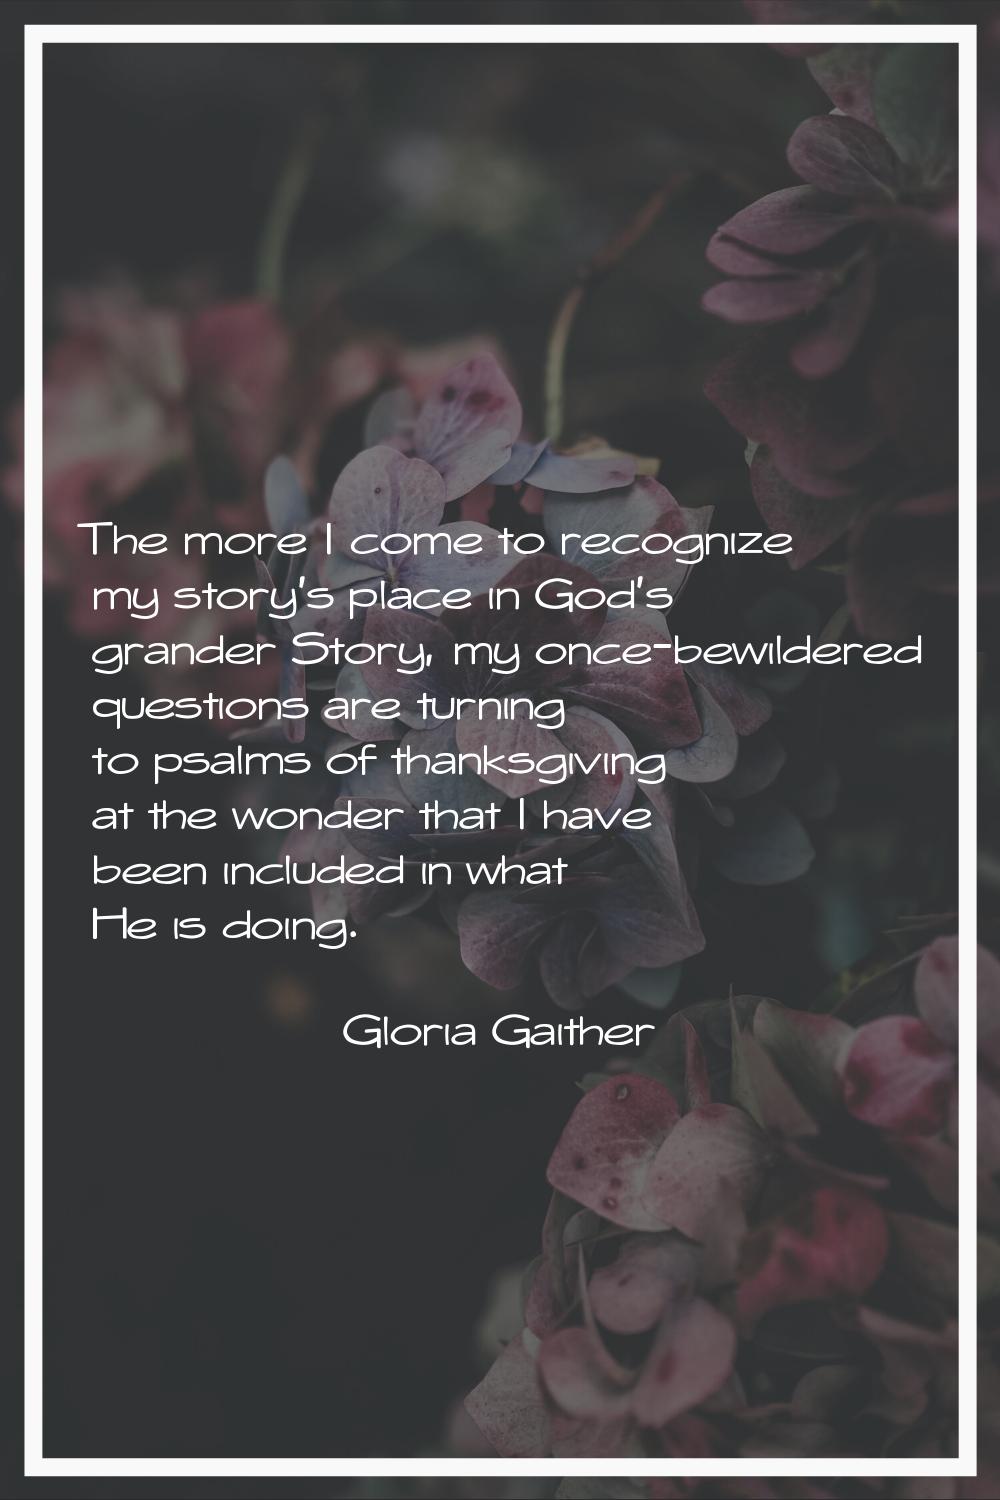 The more I come to recognize my story's place in God's grander Story, my once-bewildered questions 